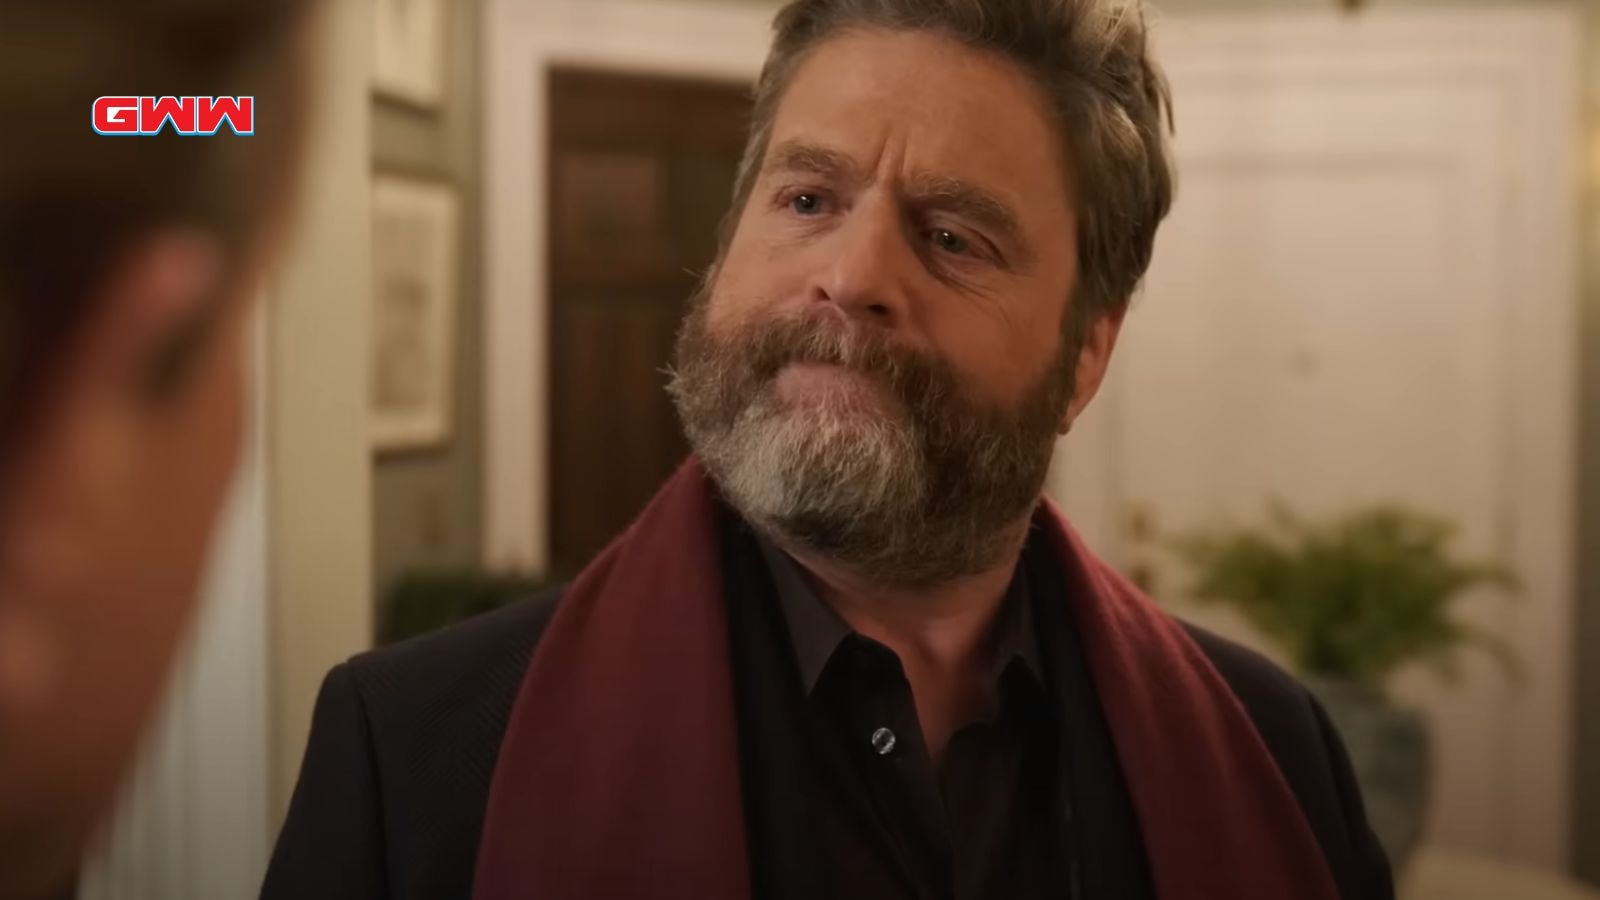 Only Murders in the Building Season 4: Zach Galifianakis as Chip Baskets